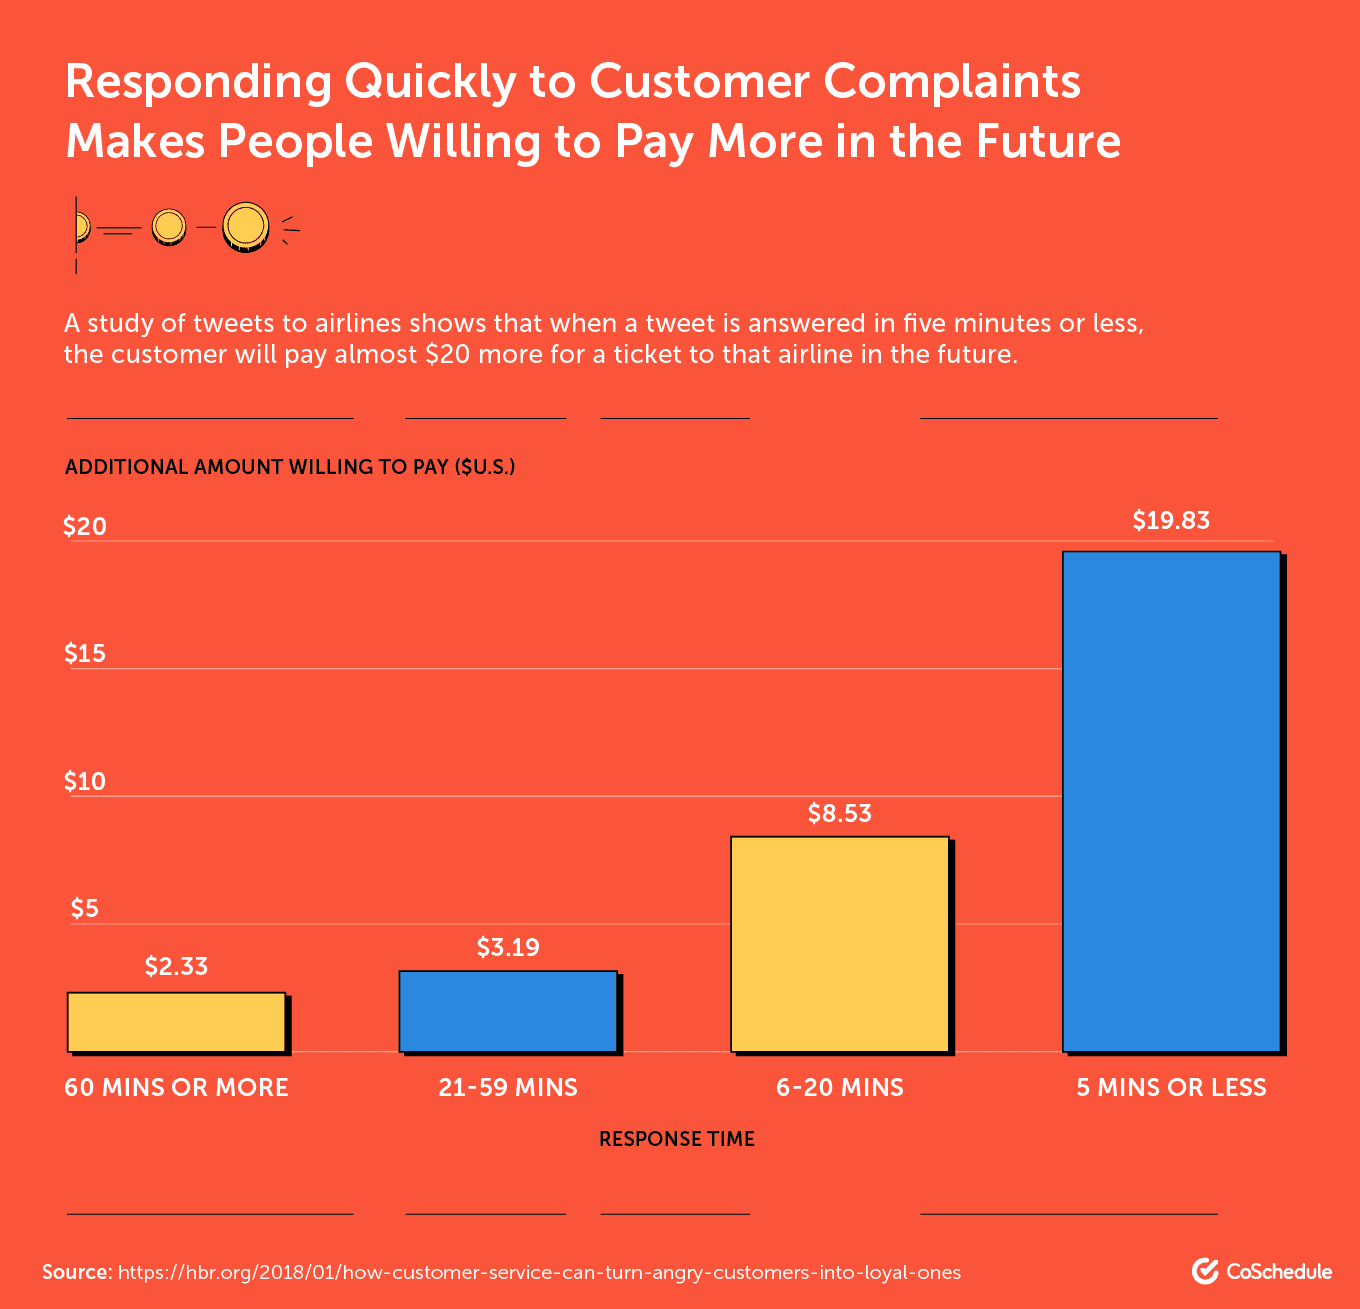 Responding Quickly to Customer Complaints Makes People Willing to Pay More in the Future